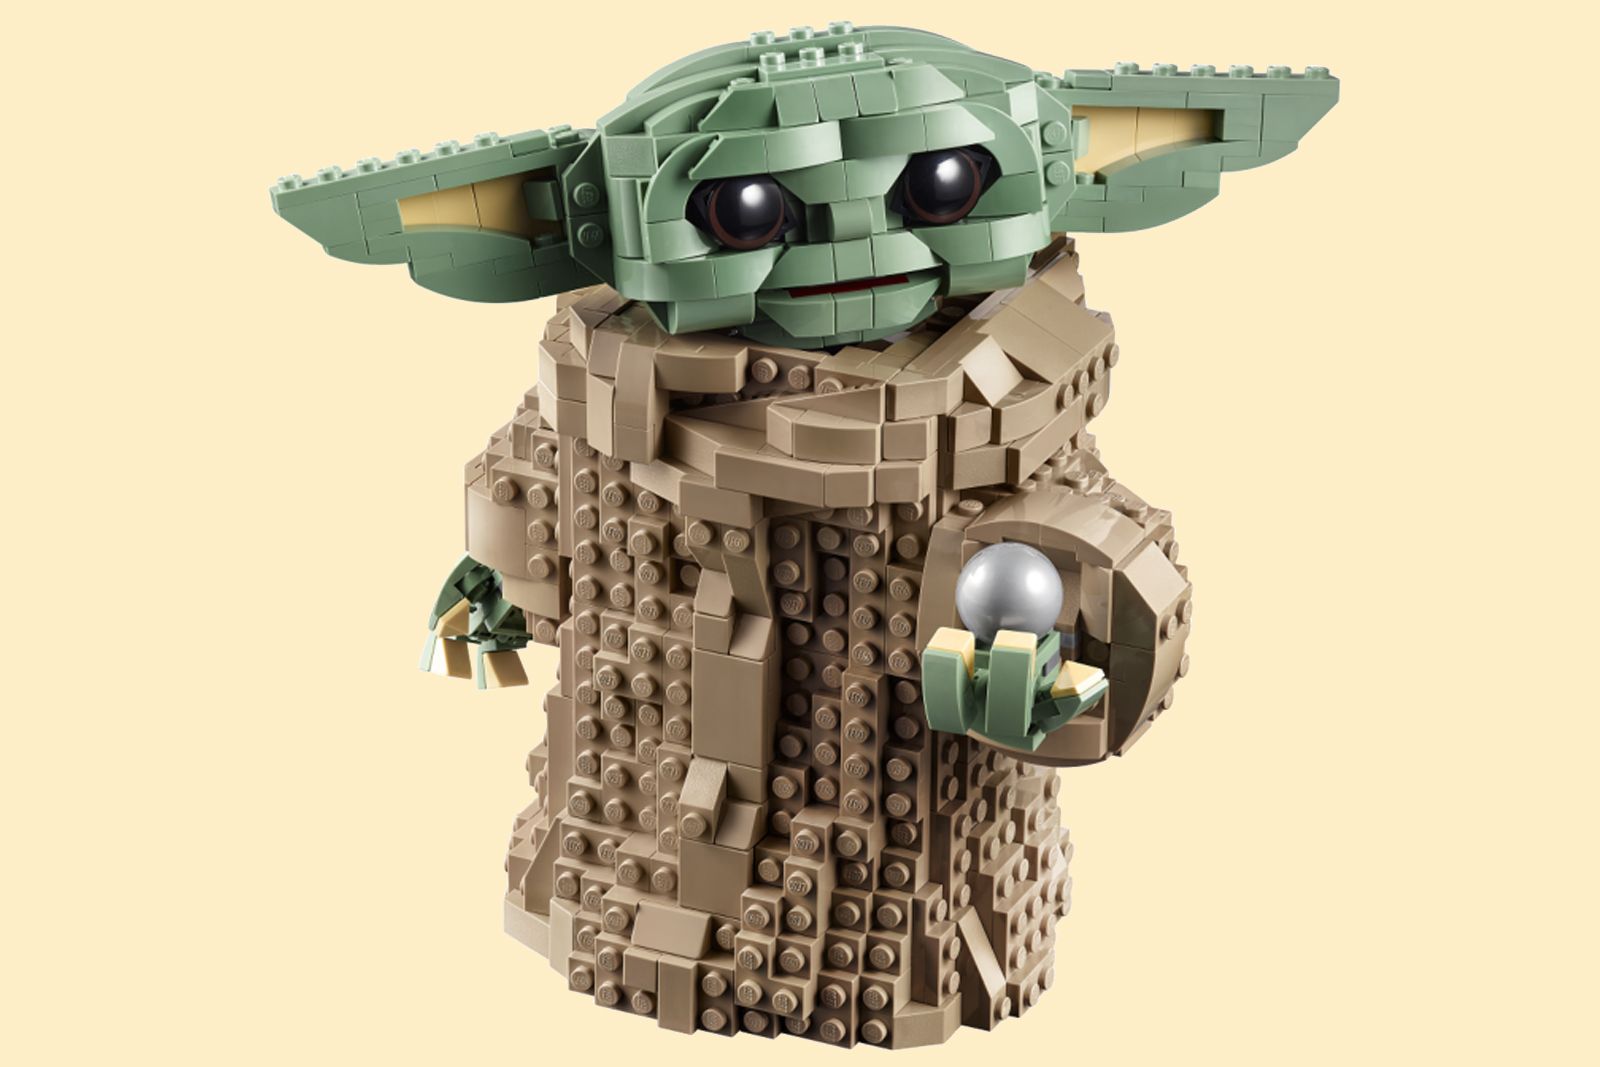 Star Wars' Baby Yoda gets a Lego recreation (of course!) photo 1